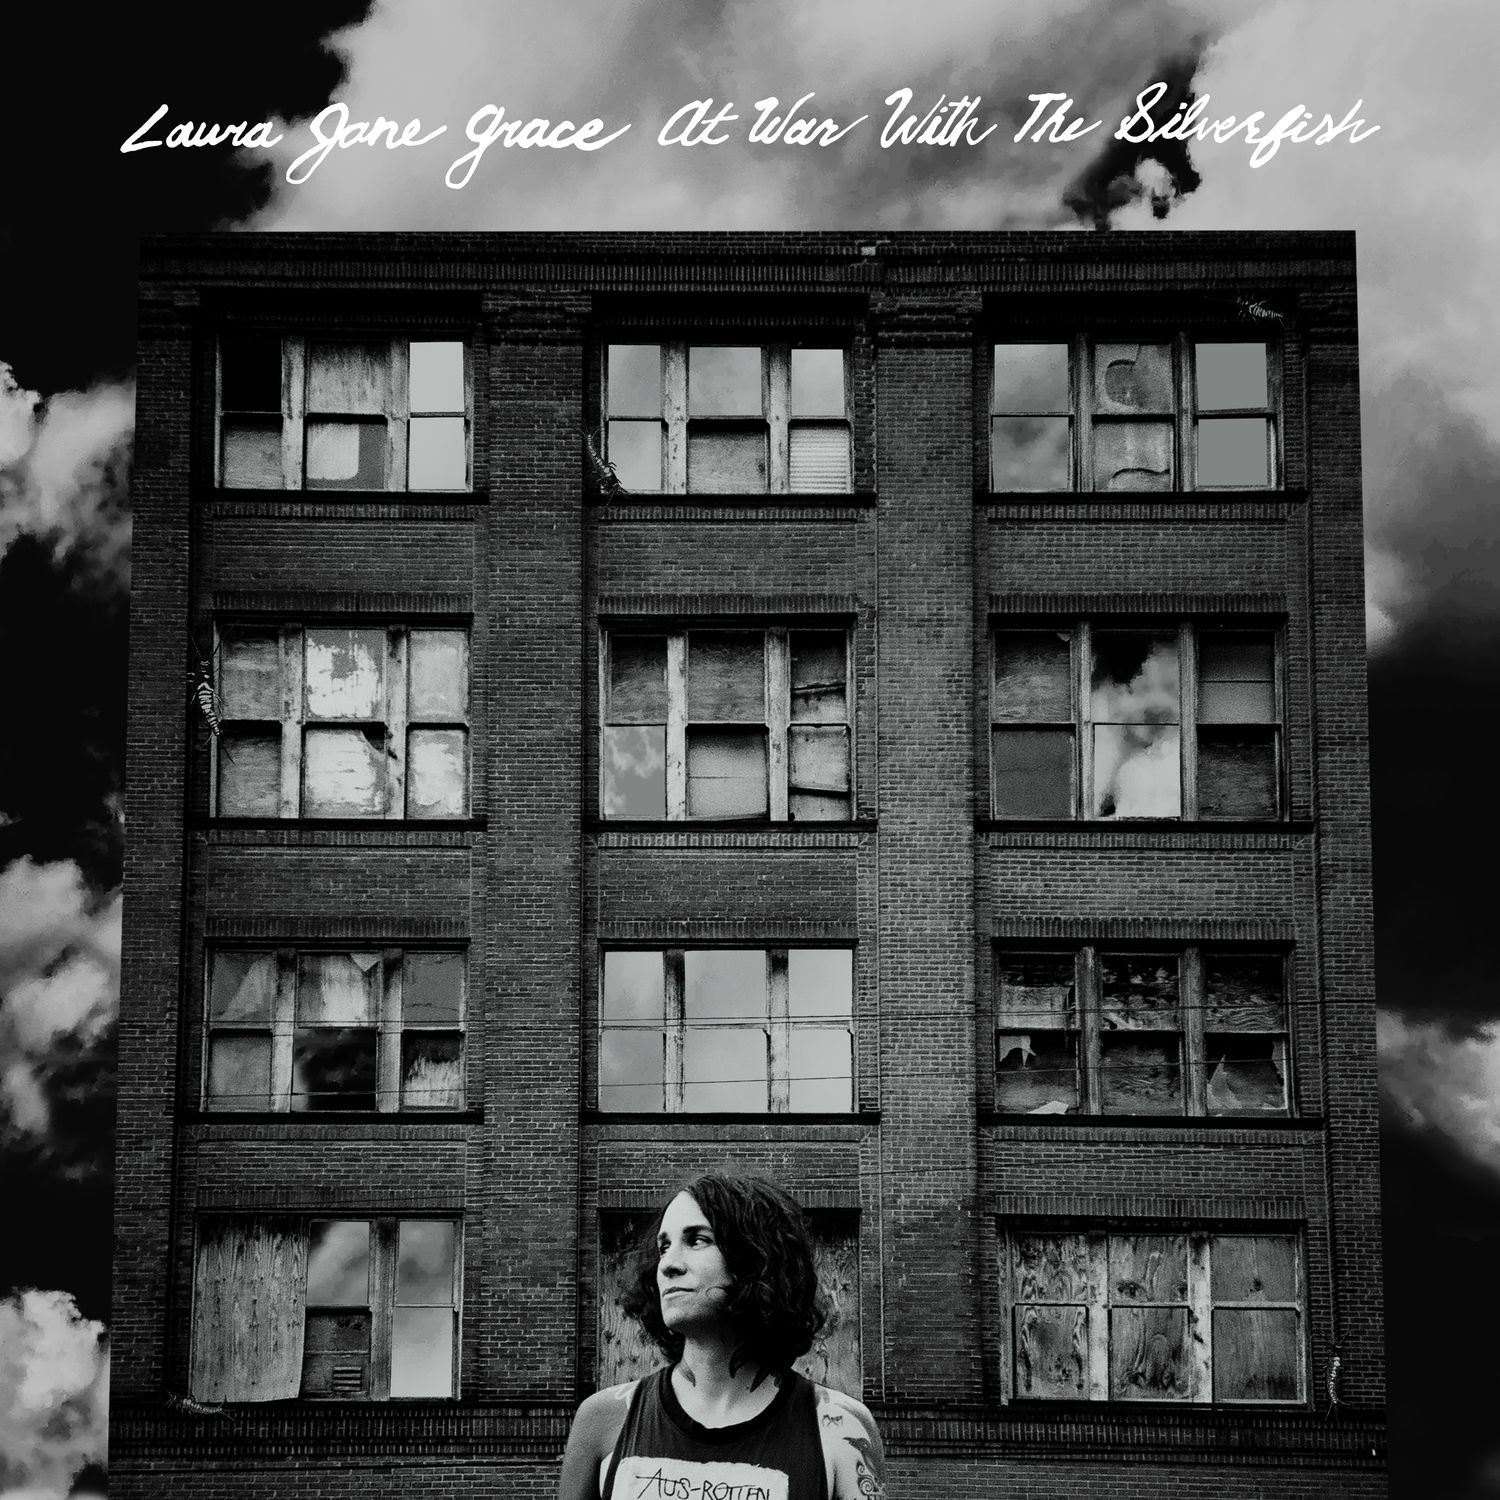 Laura Jane Grace - At War with the Silverfish (EP) (2021) [FLAC 24bit/44,1kHz]